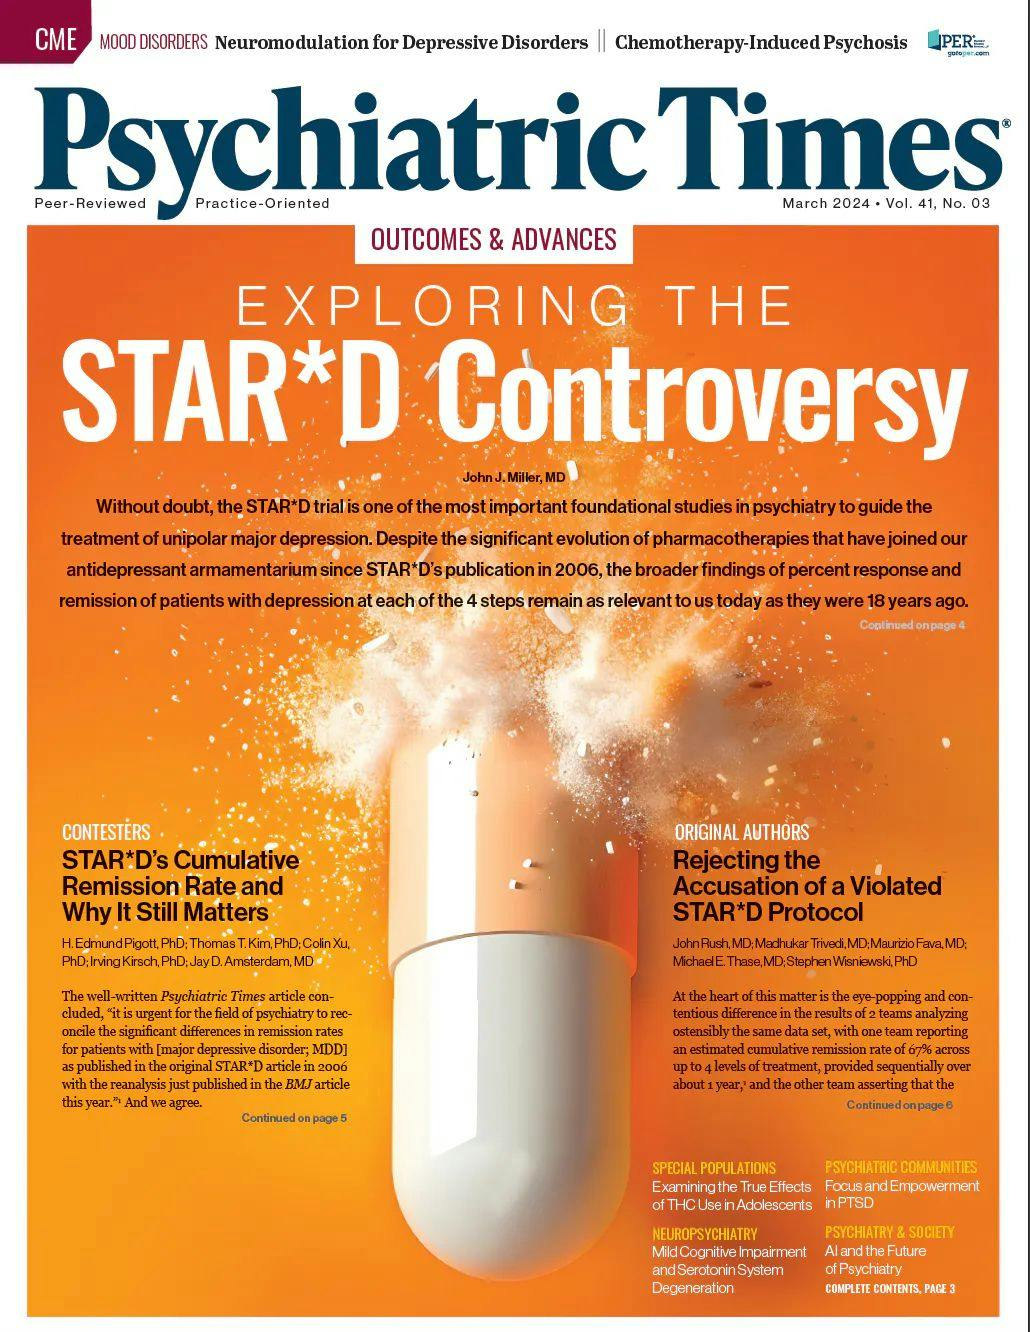 The experts weighed in on a wide variety of psychiatric issues for the March 2024 issue of Psychiatric Times.